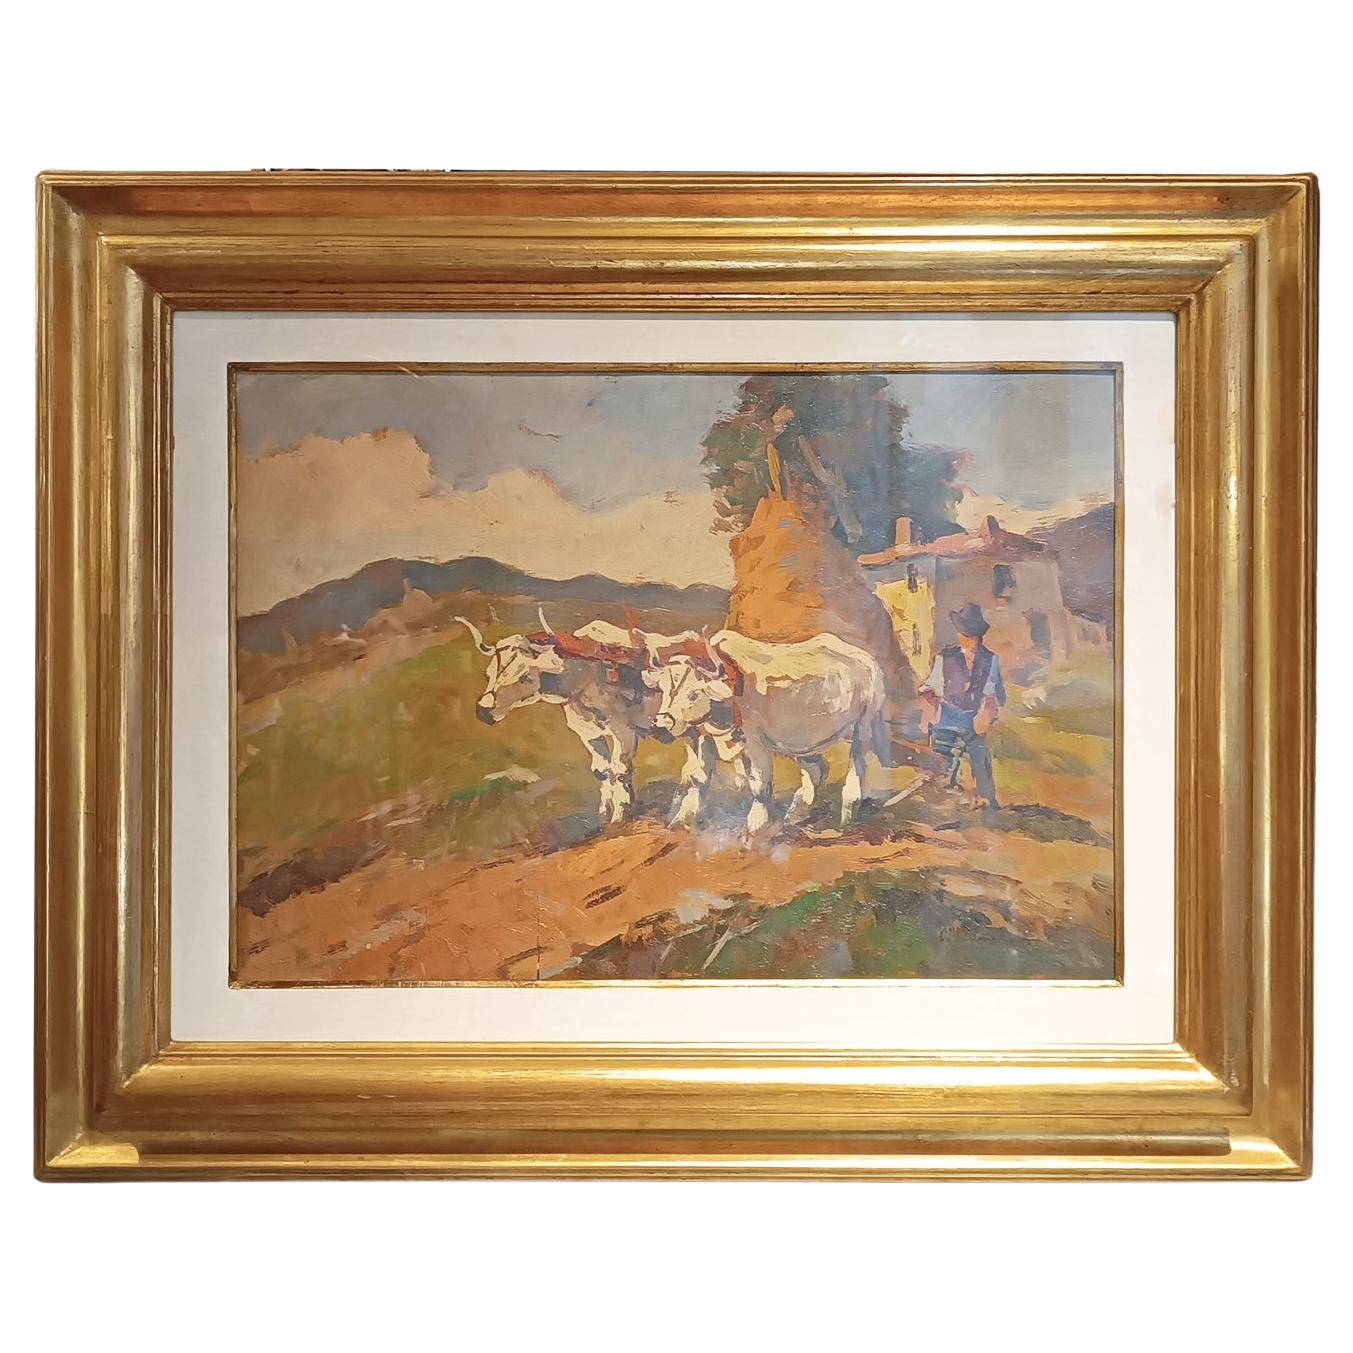 20th CENTURY CARLO DOMENICI'S RURAL SCENE WITH OXEN AND PLOW 